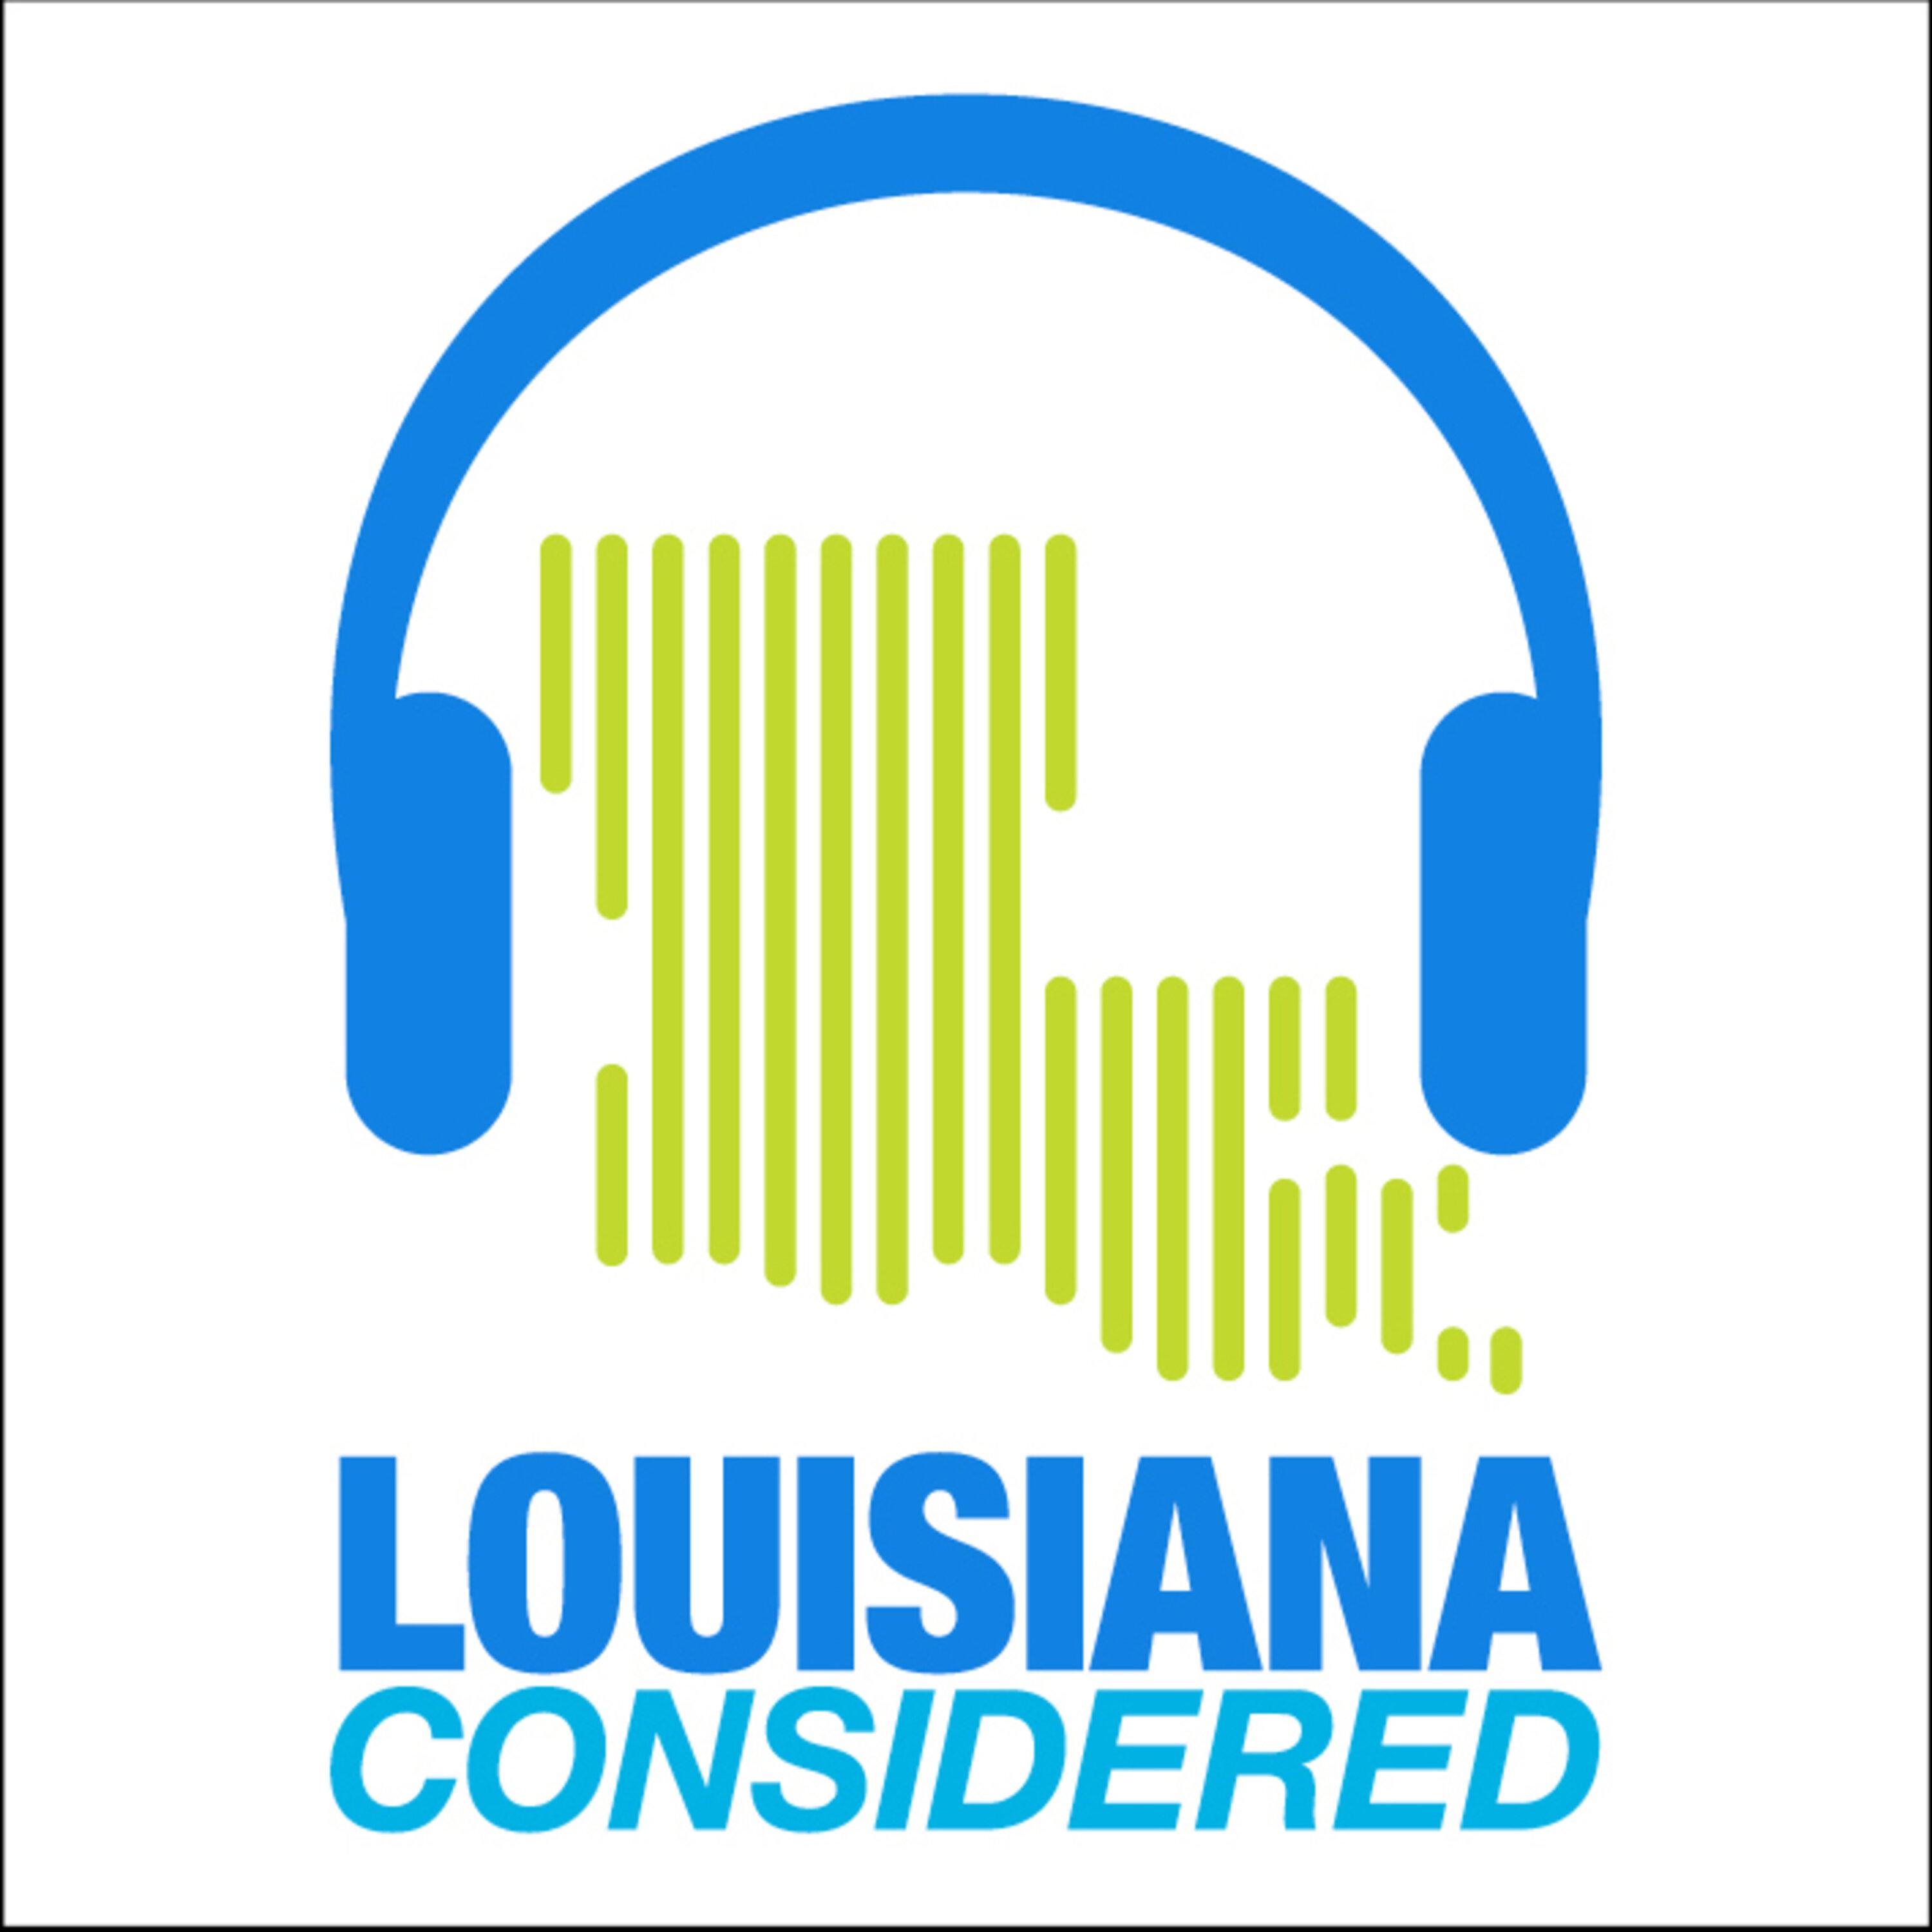 Thumbnail for "Louisiana Considered: Updates On Tropical Storm Nicholas, Out-Of-State Utility Repair Workers Help With Repairs In Ida’s Wake, Some Louisiana Schools Face Lengthy Facility Repairs".